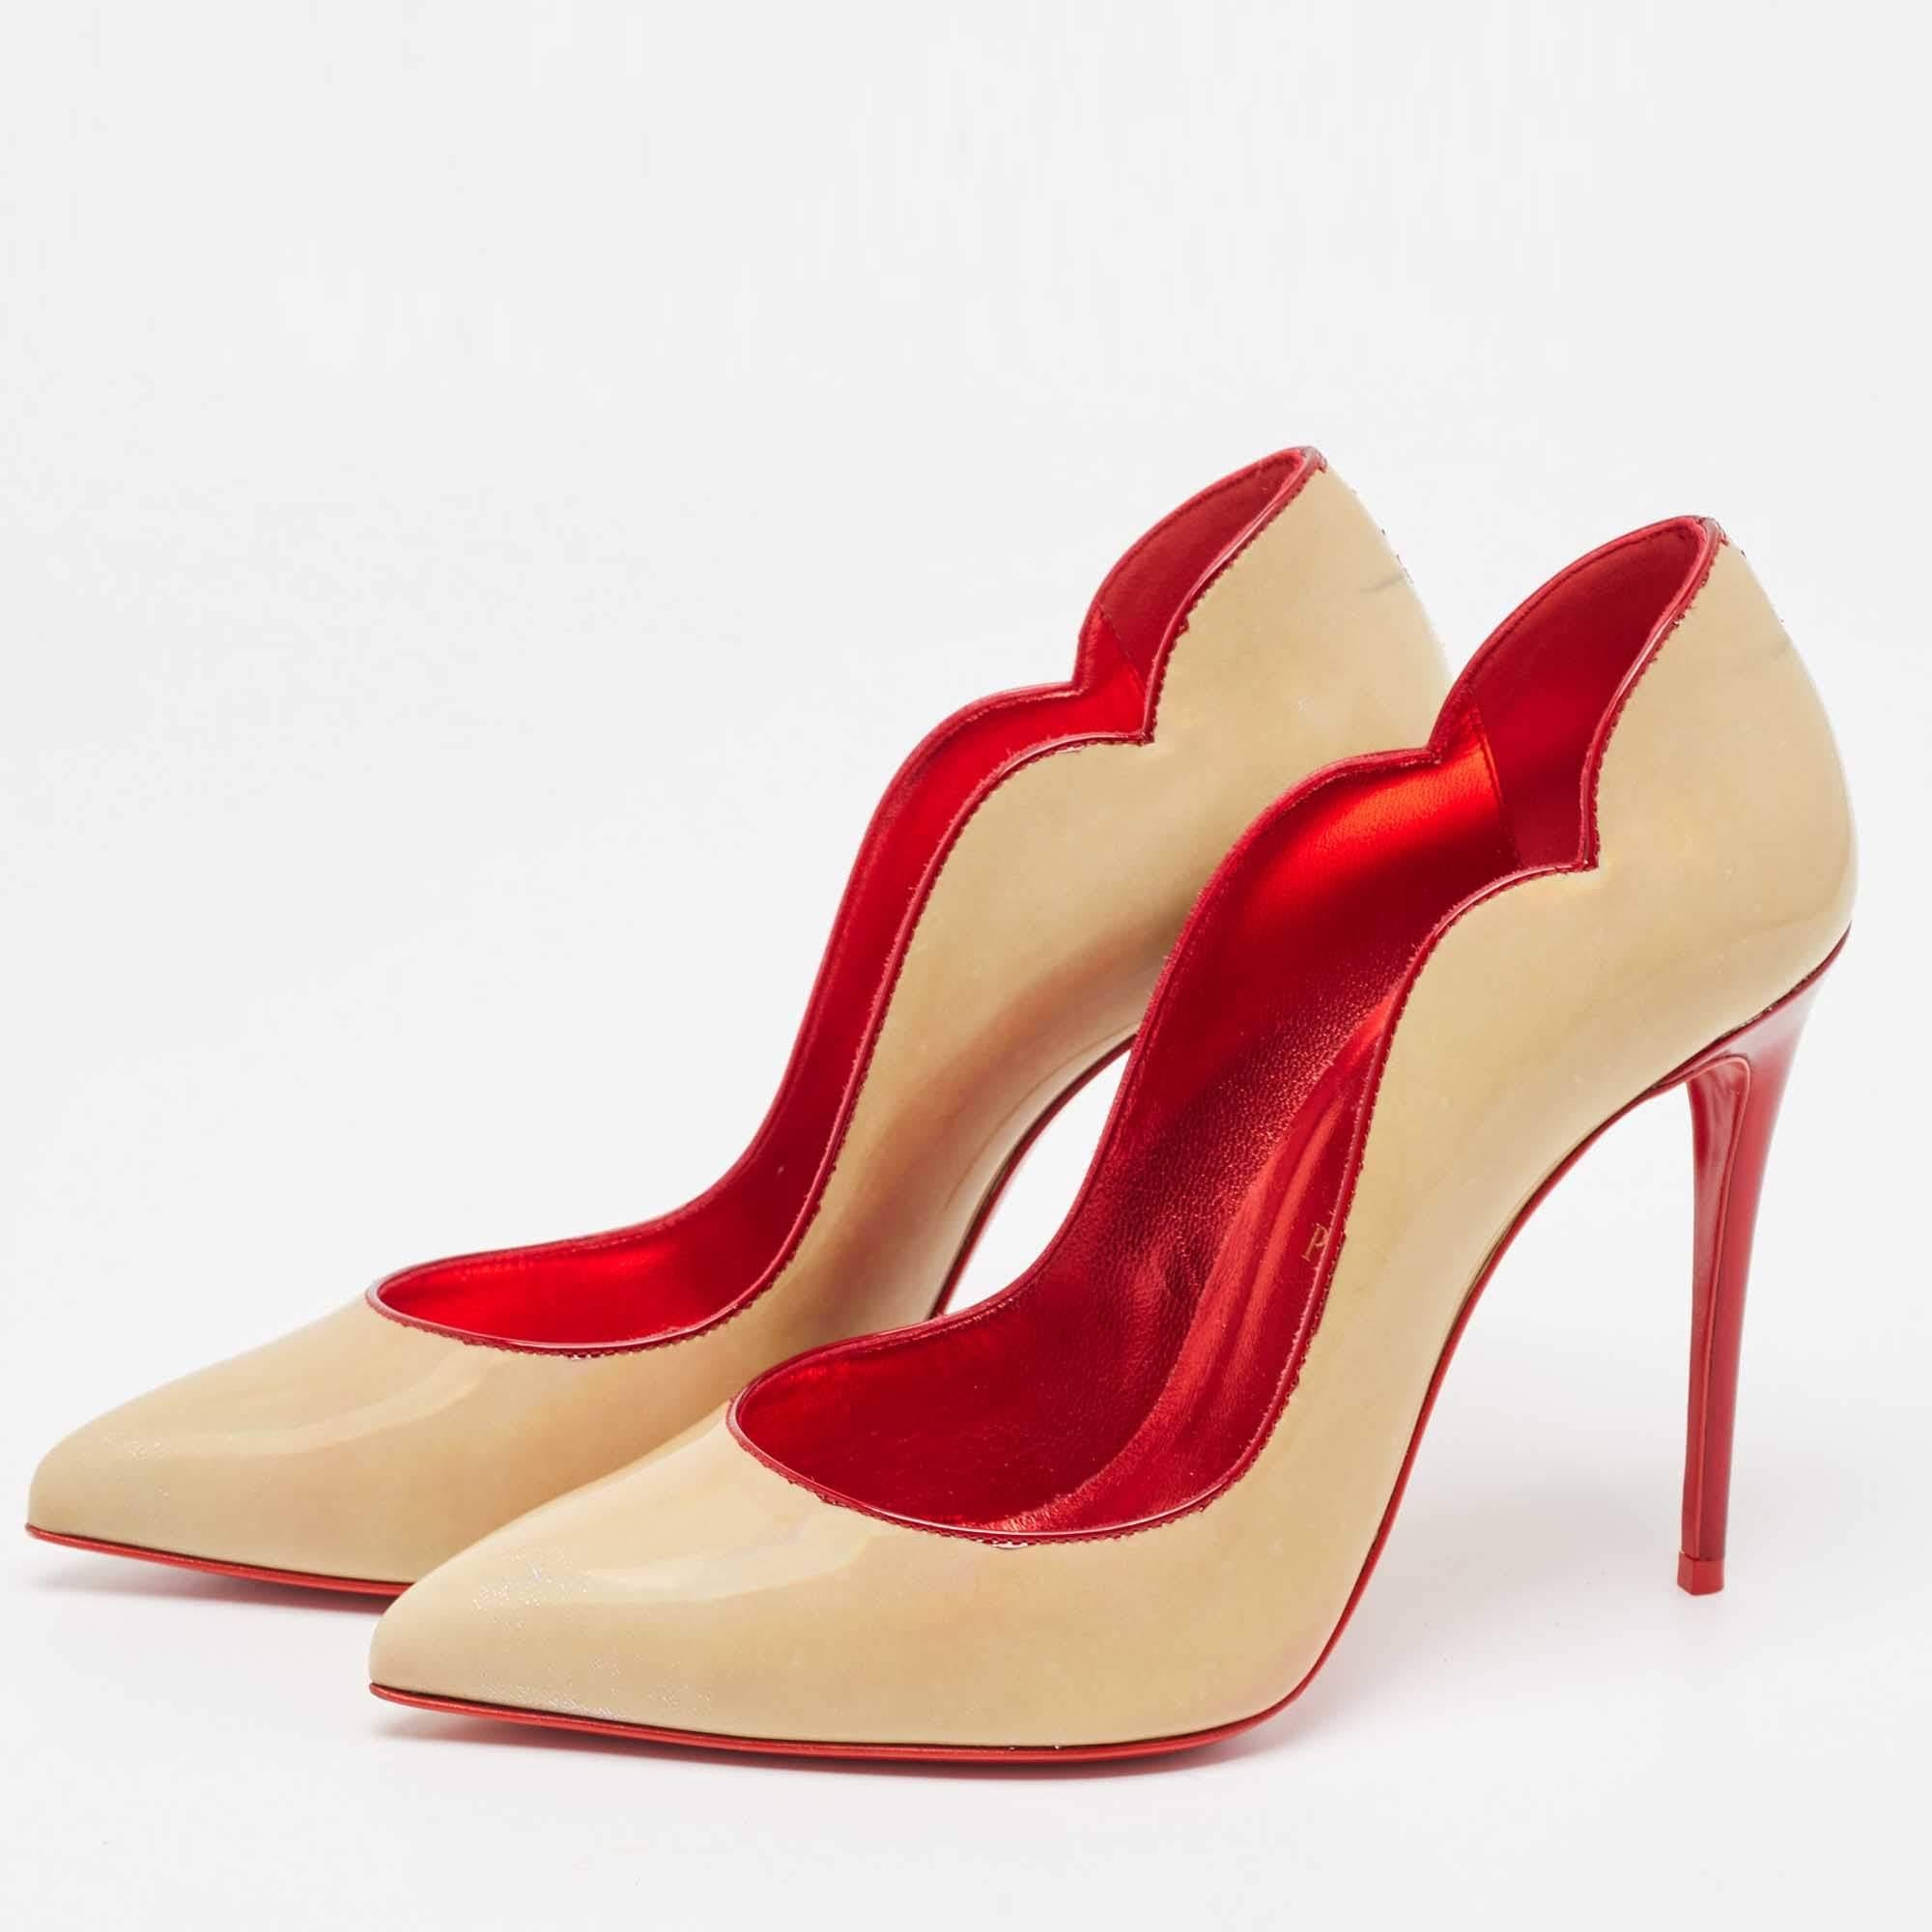 Christian Louboutin Beige Patent Leather Hot Chick Pumps Size 37.5 1